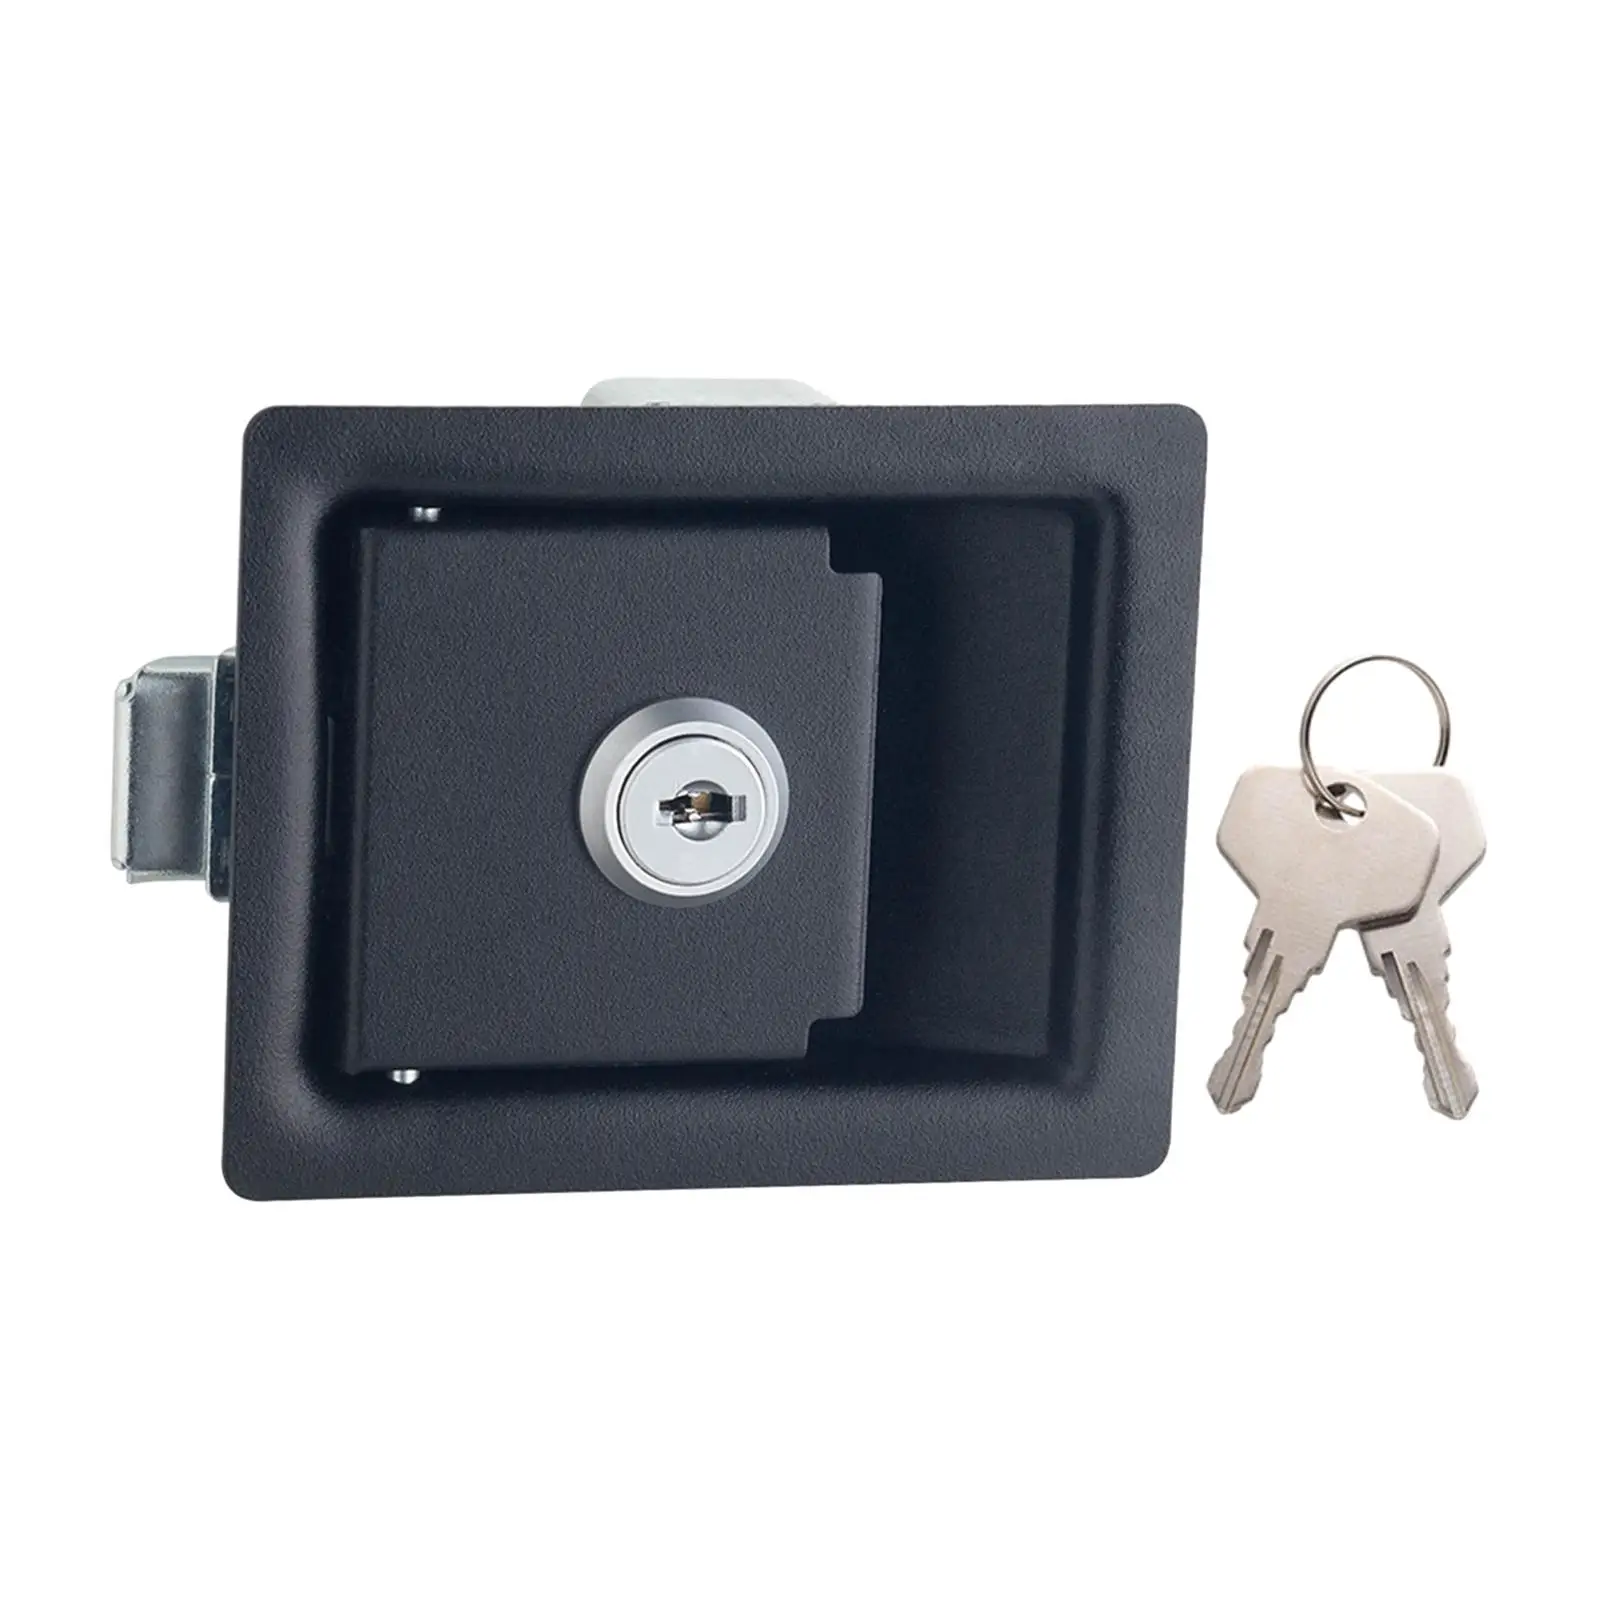 Tool Box Lock Stainless Steel Panel Lock with 2 Keys for Boat Toolbox Camper